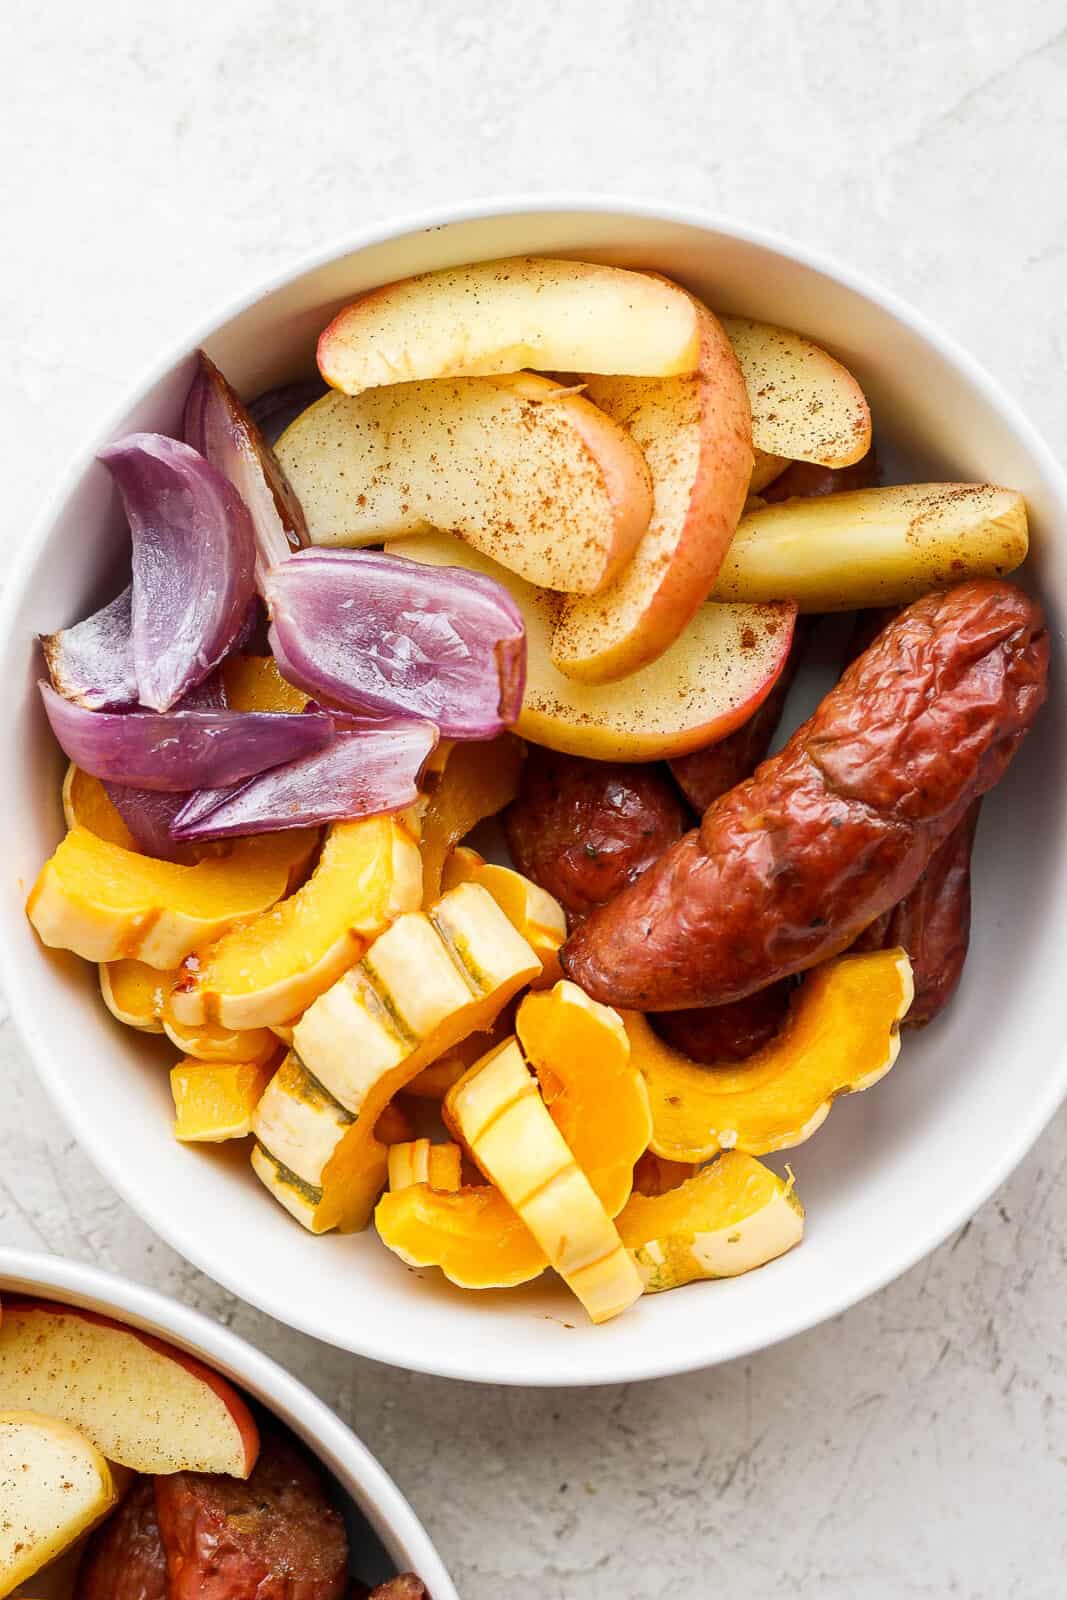 The sausage sheet pan meal in a bowl.